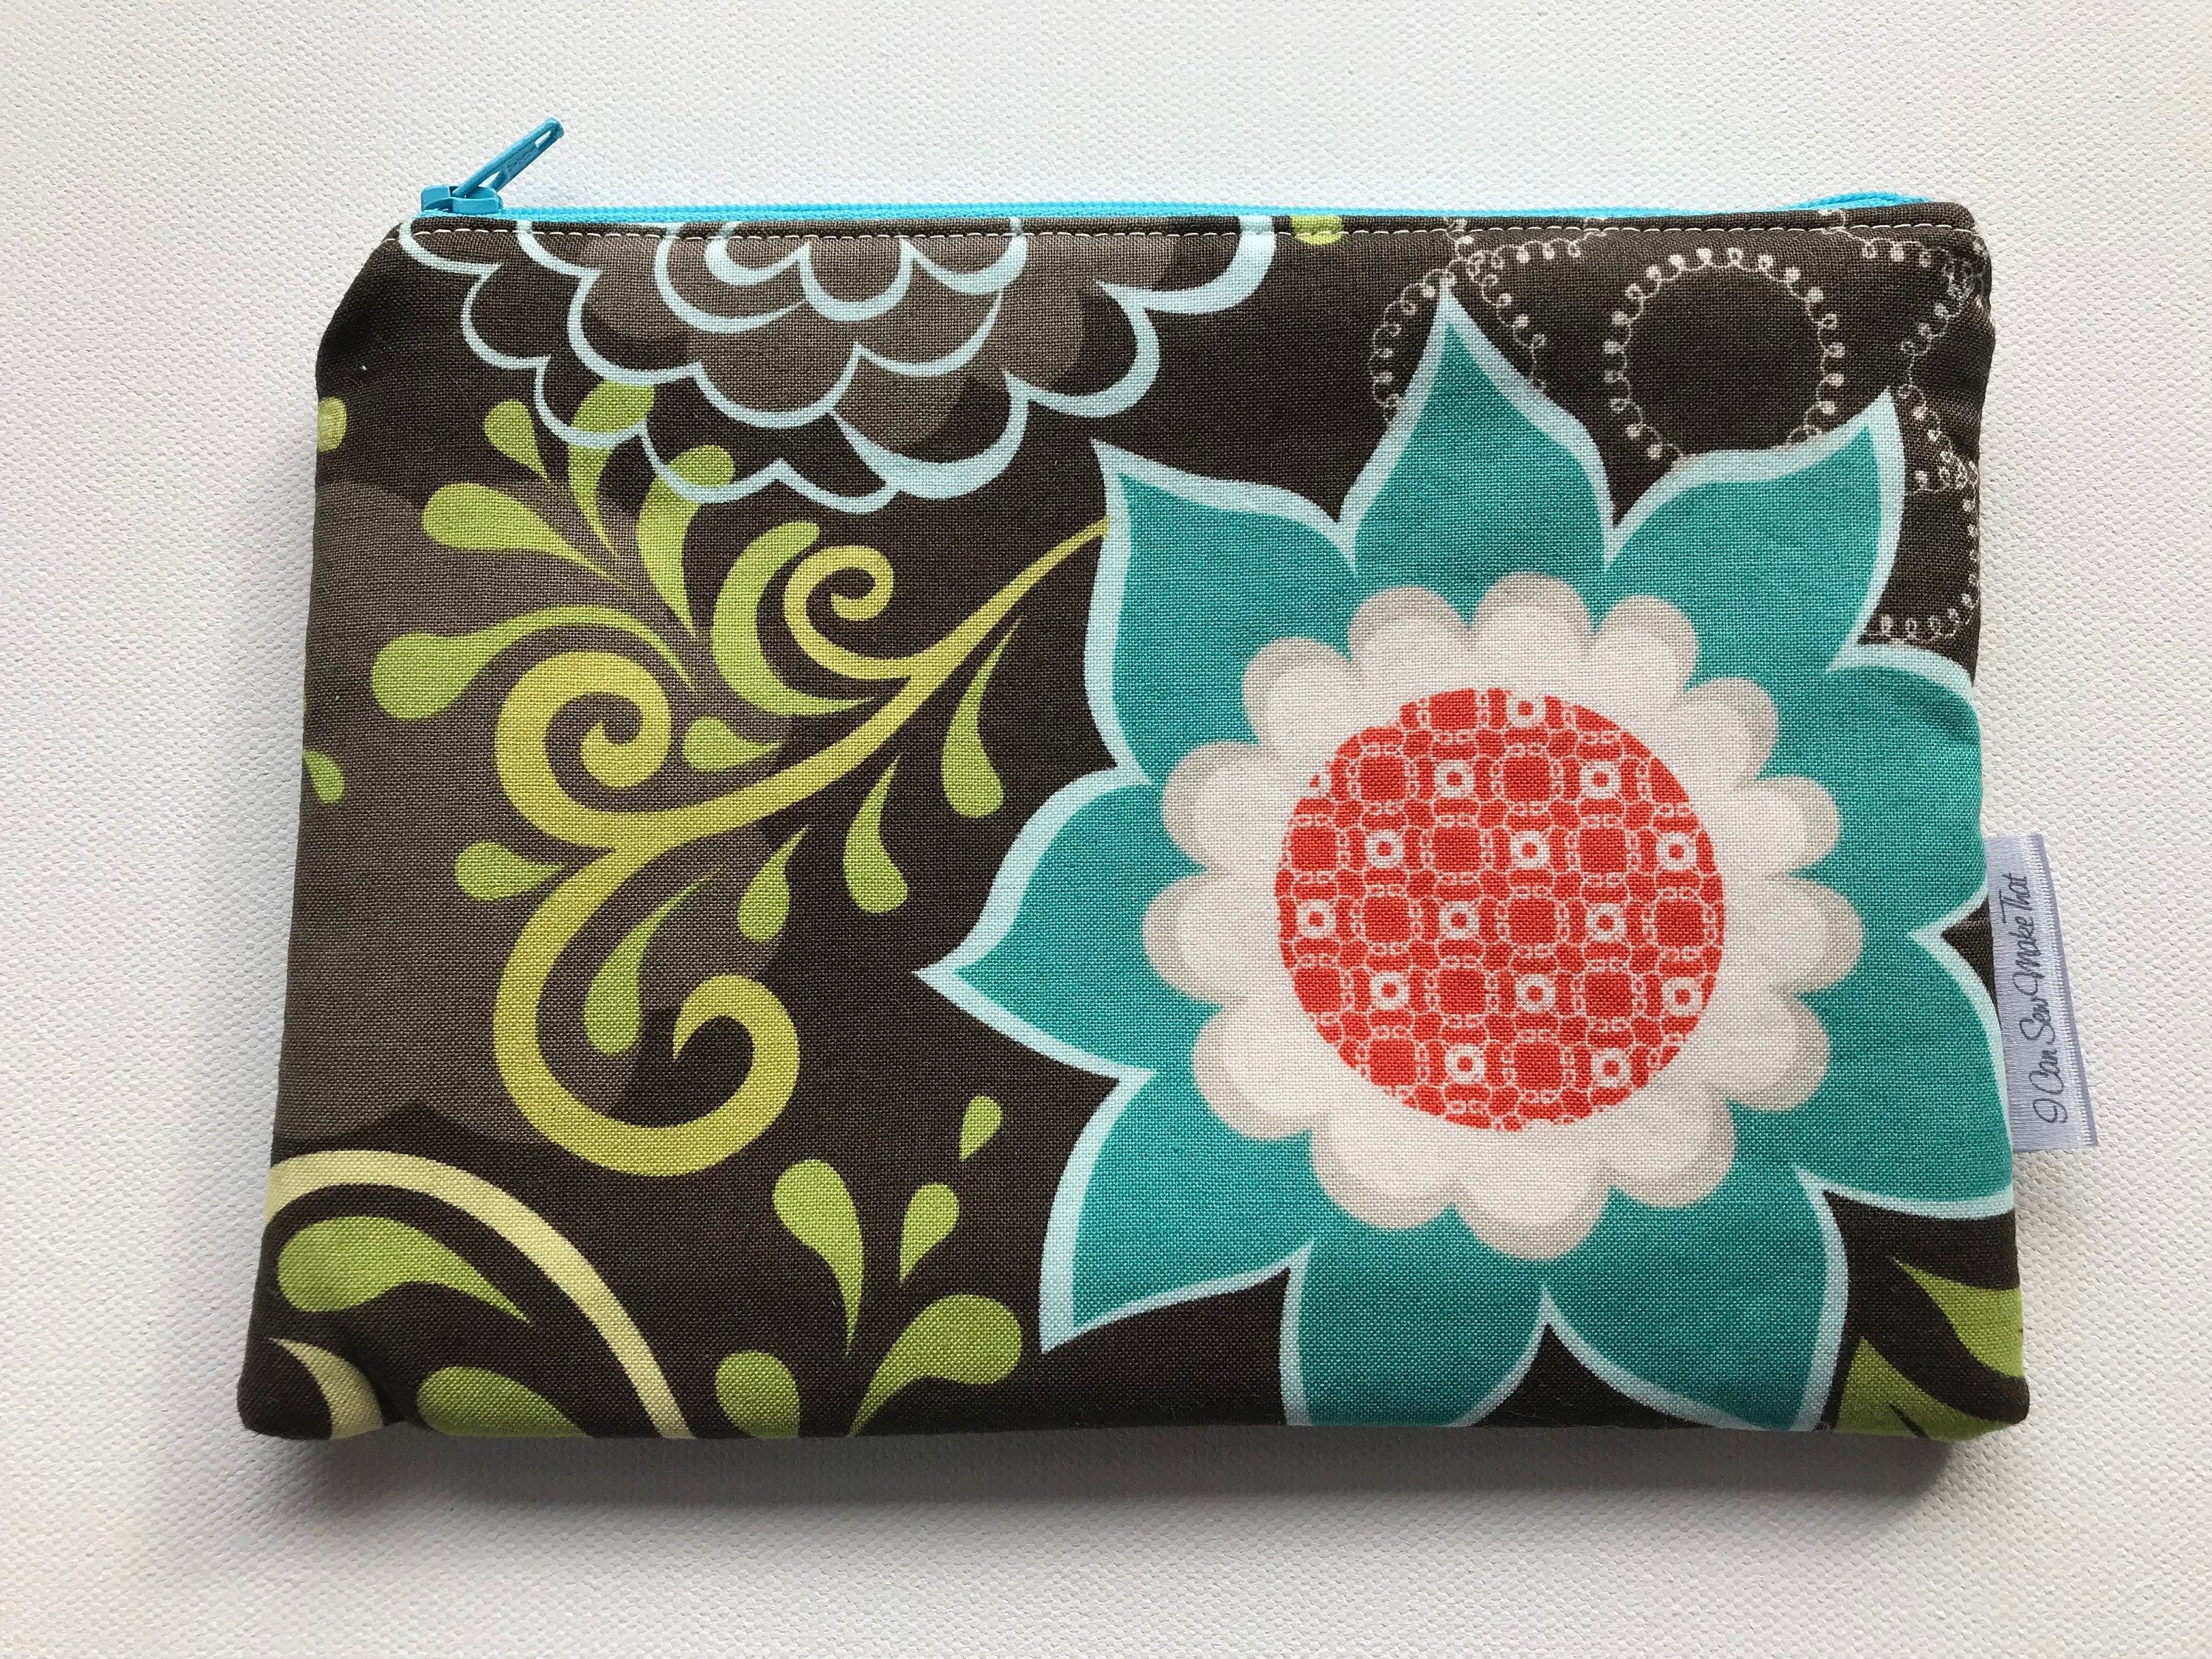 Notion Pouch - Big turquoise flower